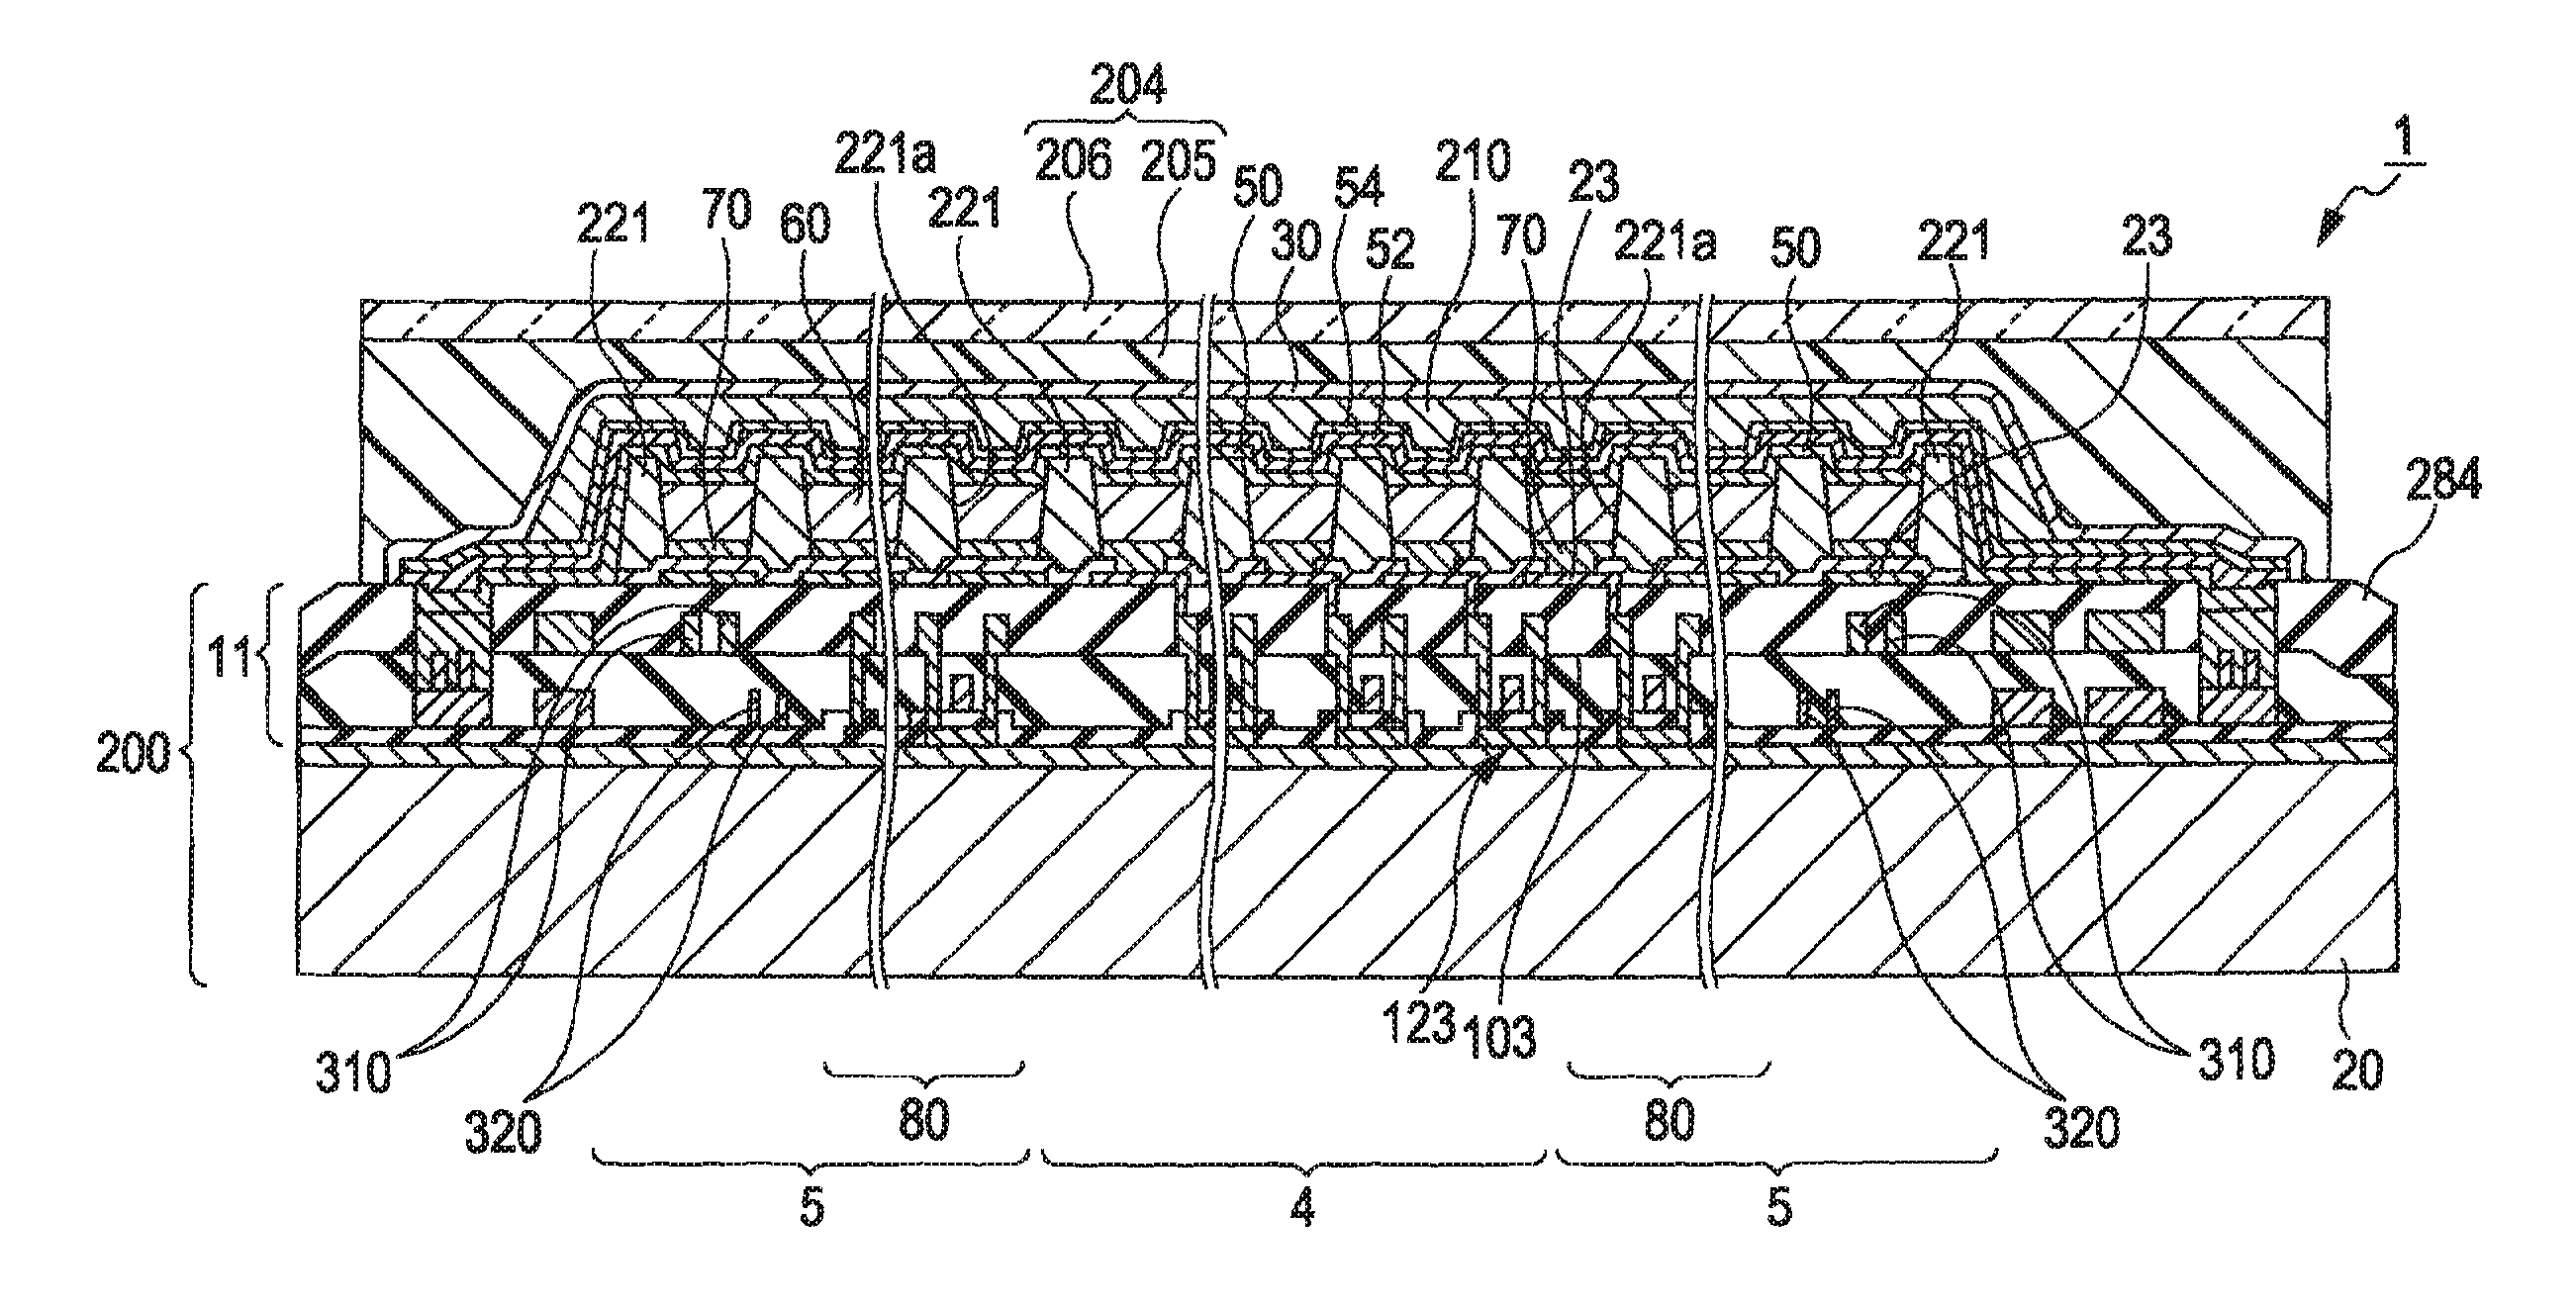 Emissive device, process for producing emissive device, and electronic apparatus